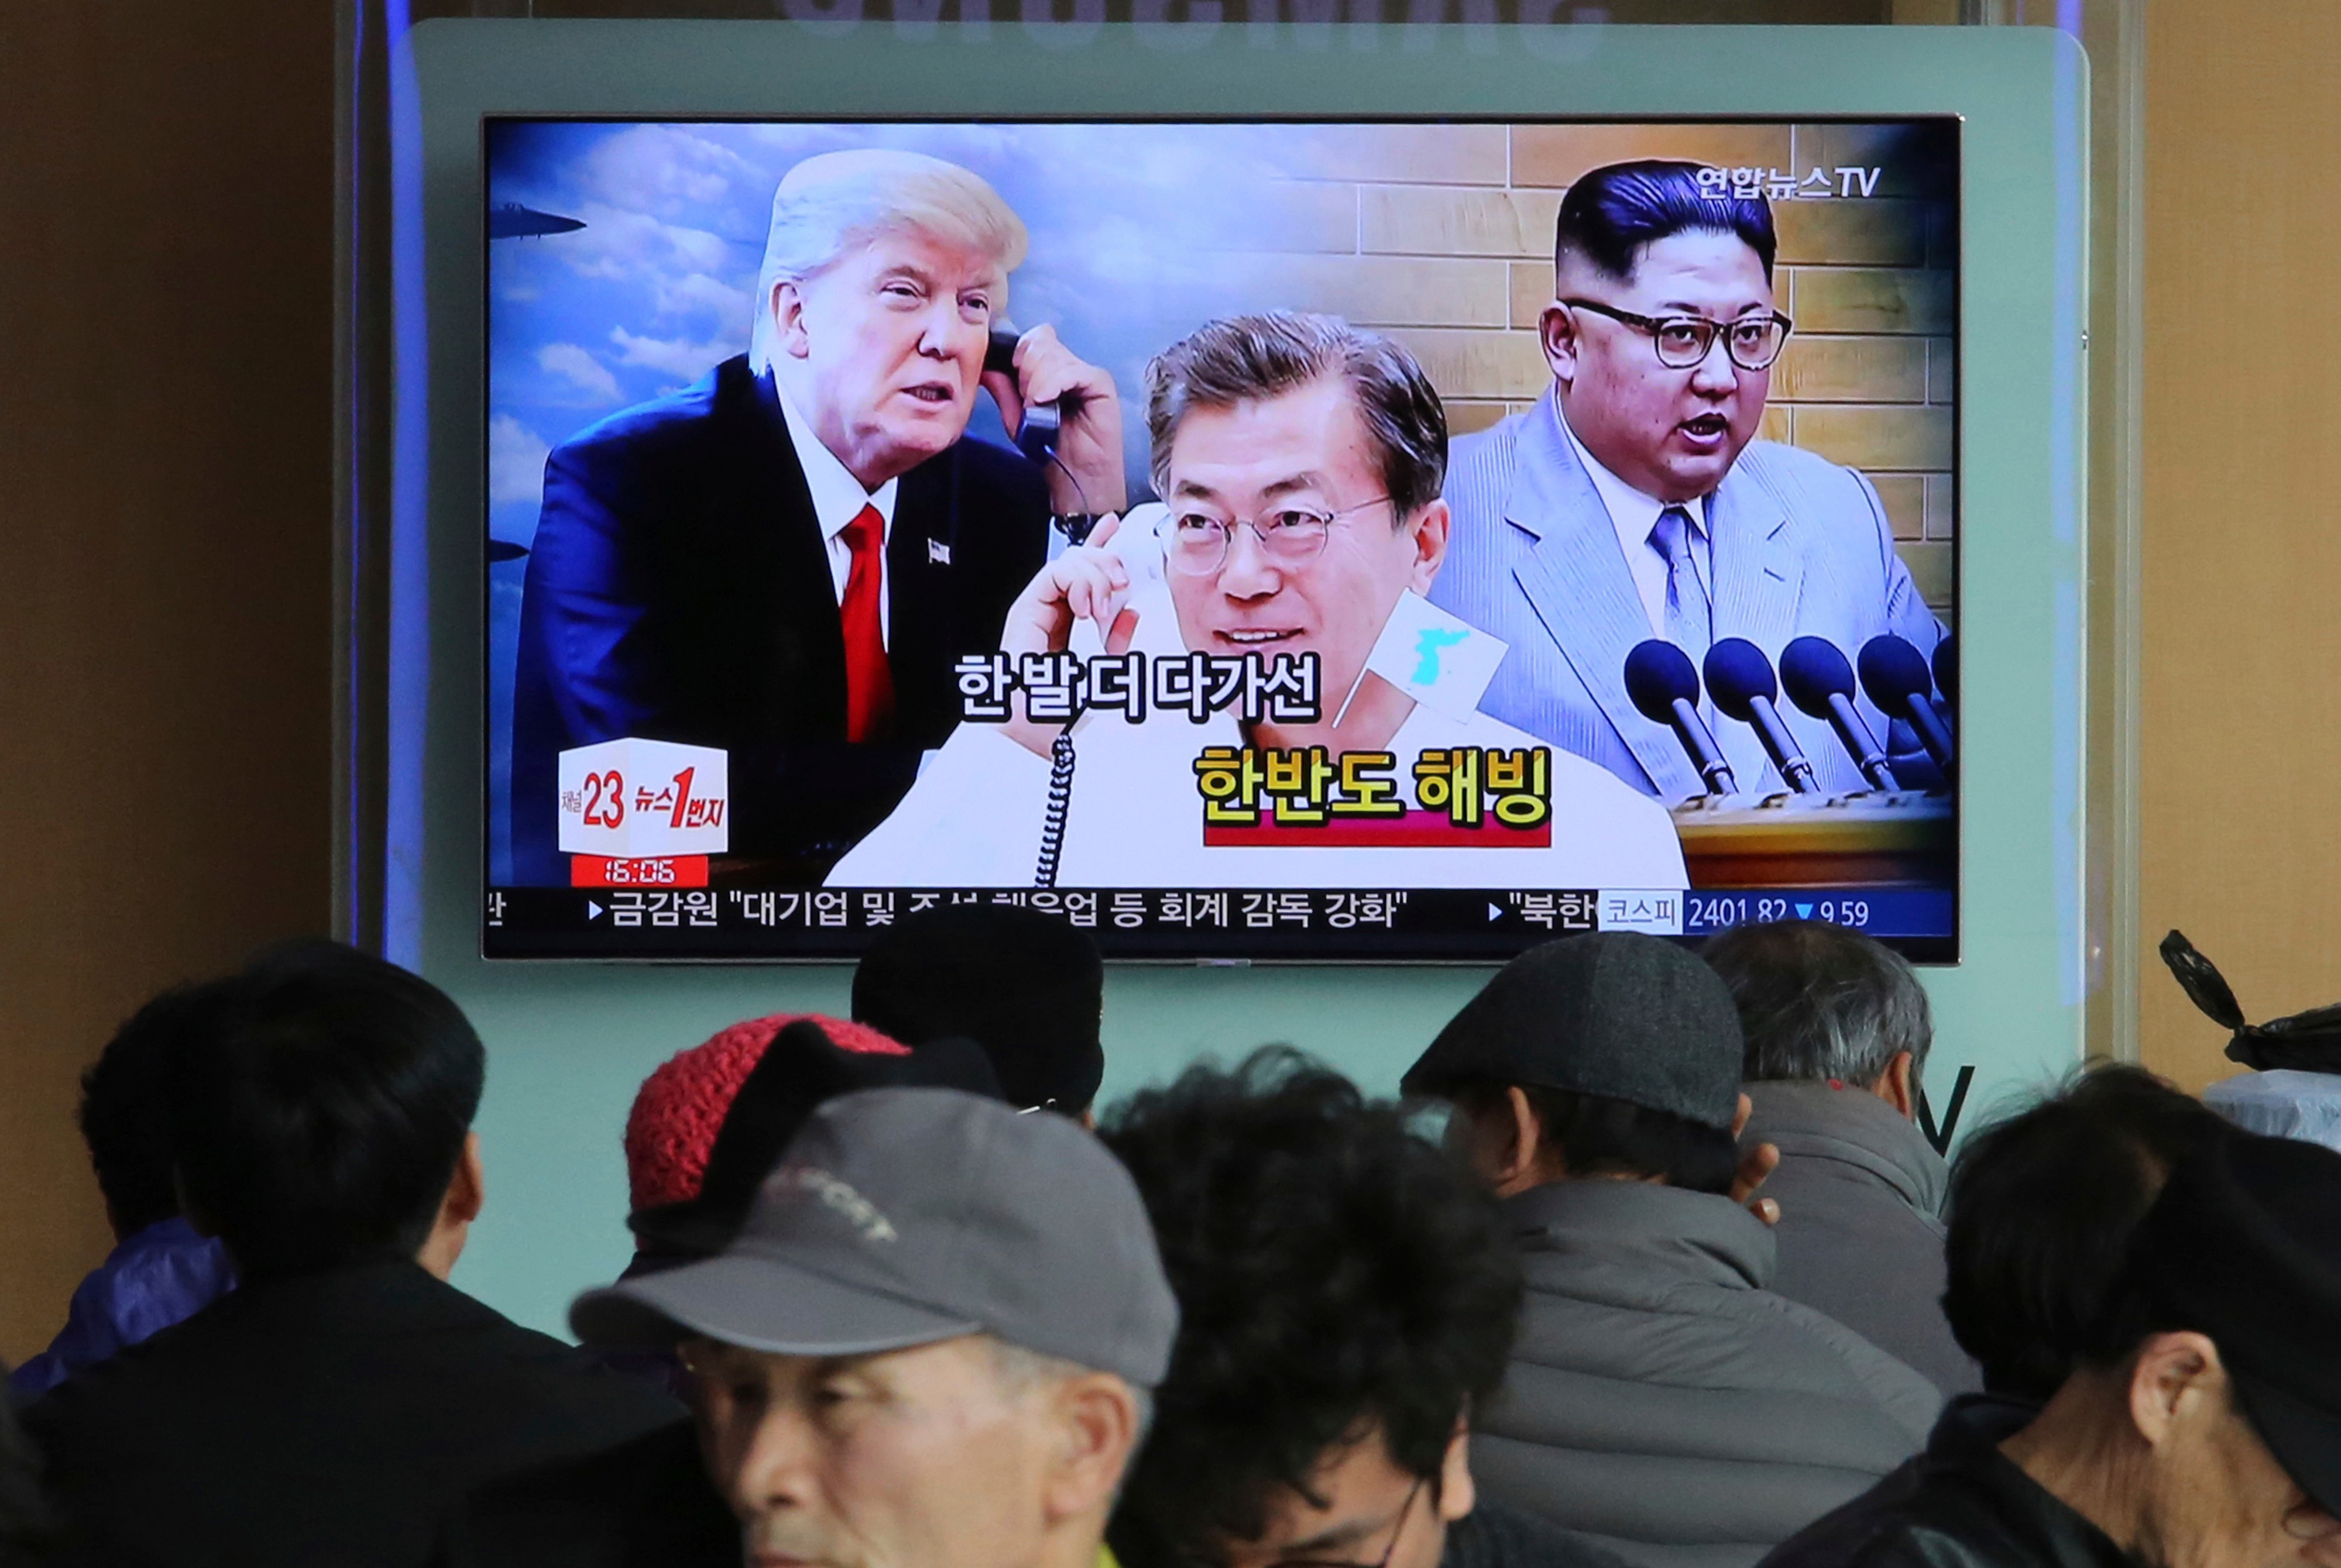 A TV screen at the Seoul Railway Station shows images of North Korean leader Kim Jong-un (right), South Korean President Moon Jae-in (centre) and US President Donald Trump in a news report, on March 7. Seoul, Washington and Beijing should focus on producing a settlement to the North Korean nuclear issue that is acceptable to all. Photo: AP